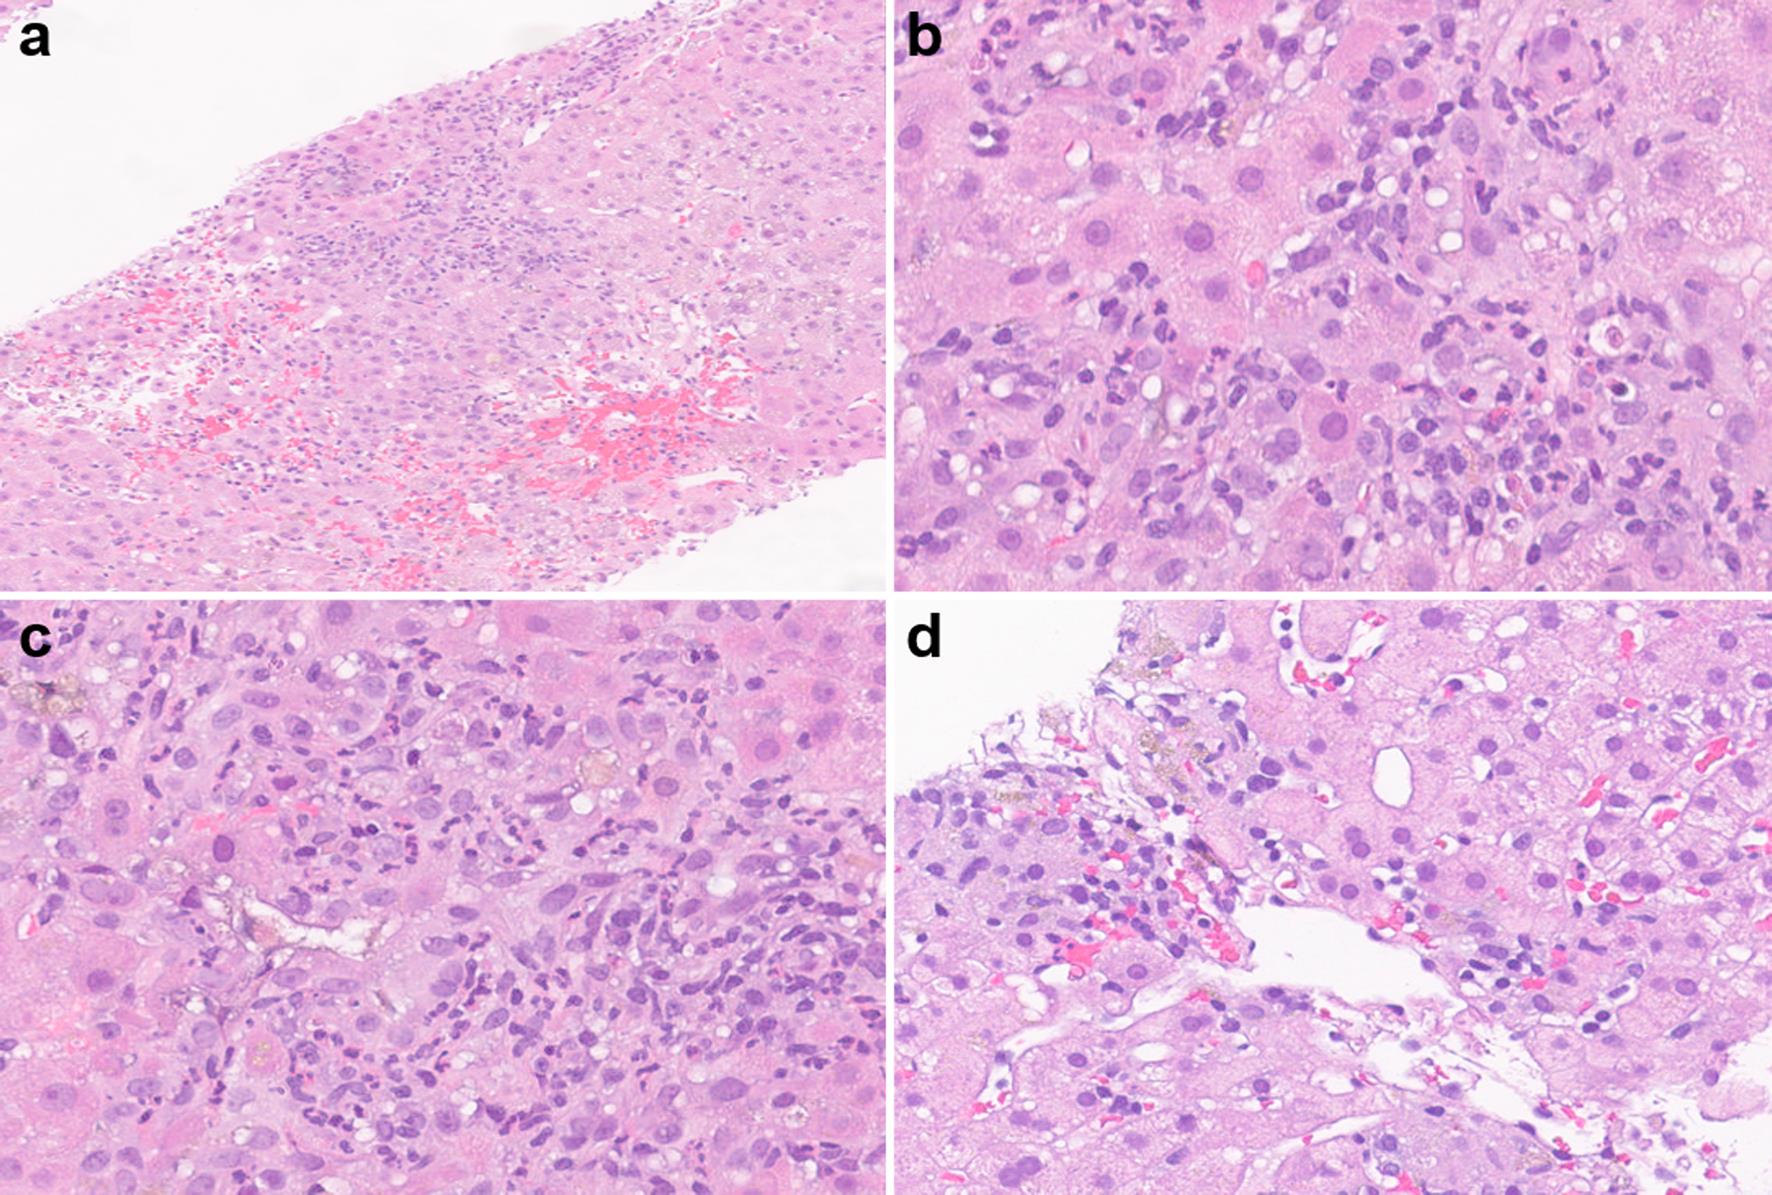 Immune checkpoint inhibitor-induced liver injury, mixed hepatitic and cholangitic pattern.